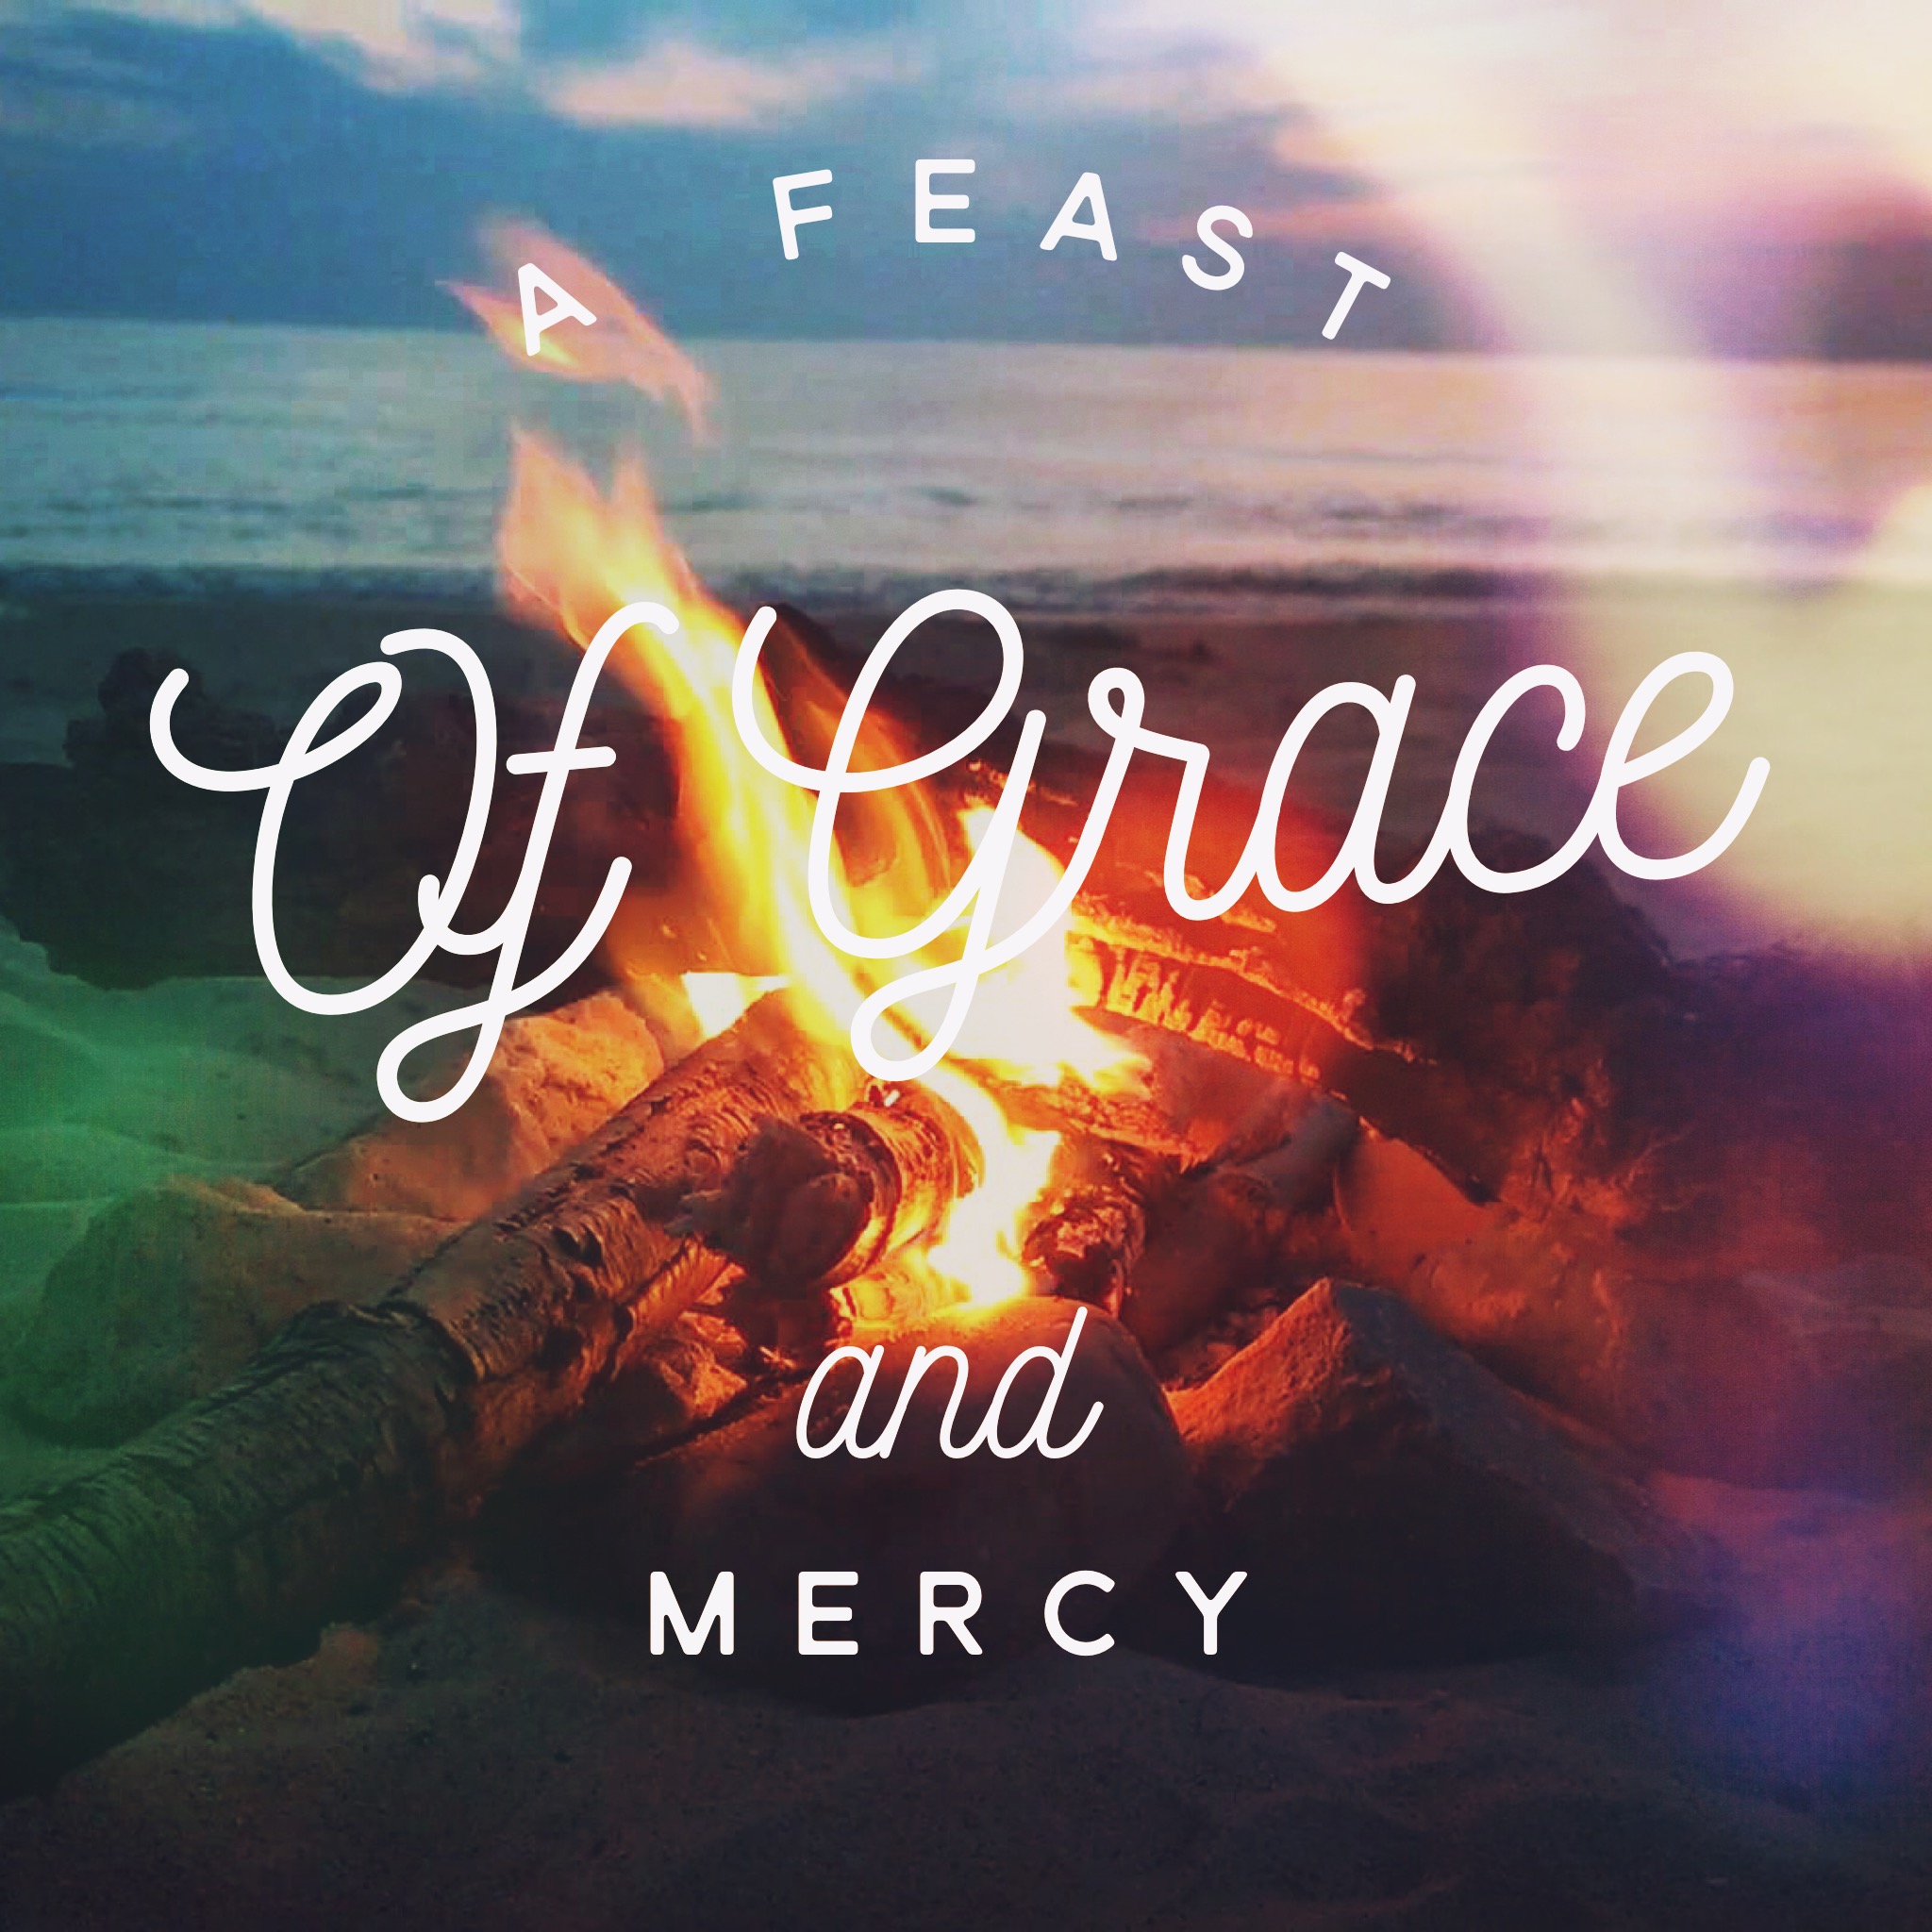 John 21 - A Feast of Grace and Mercy